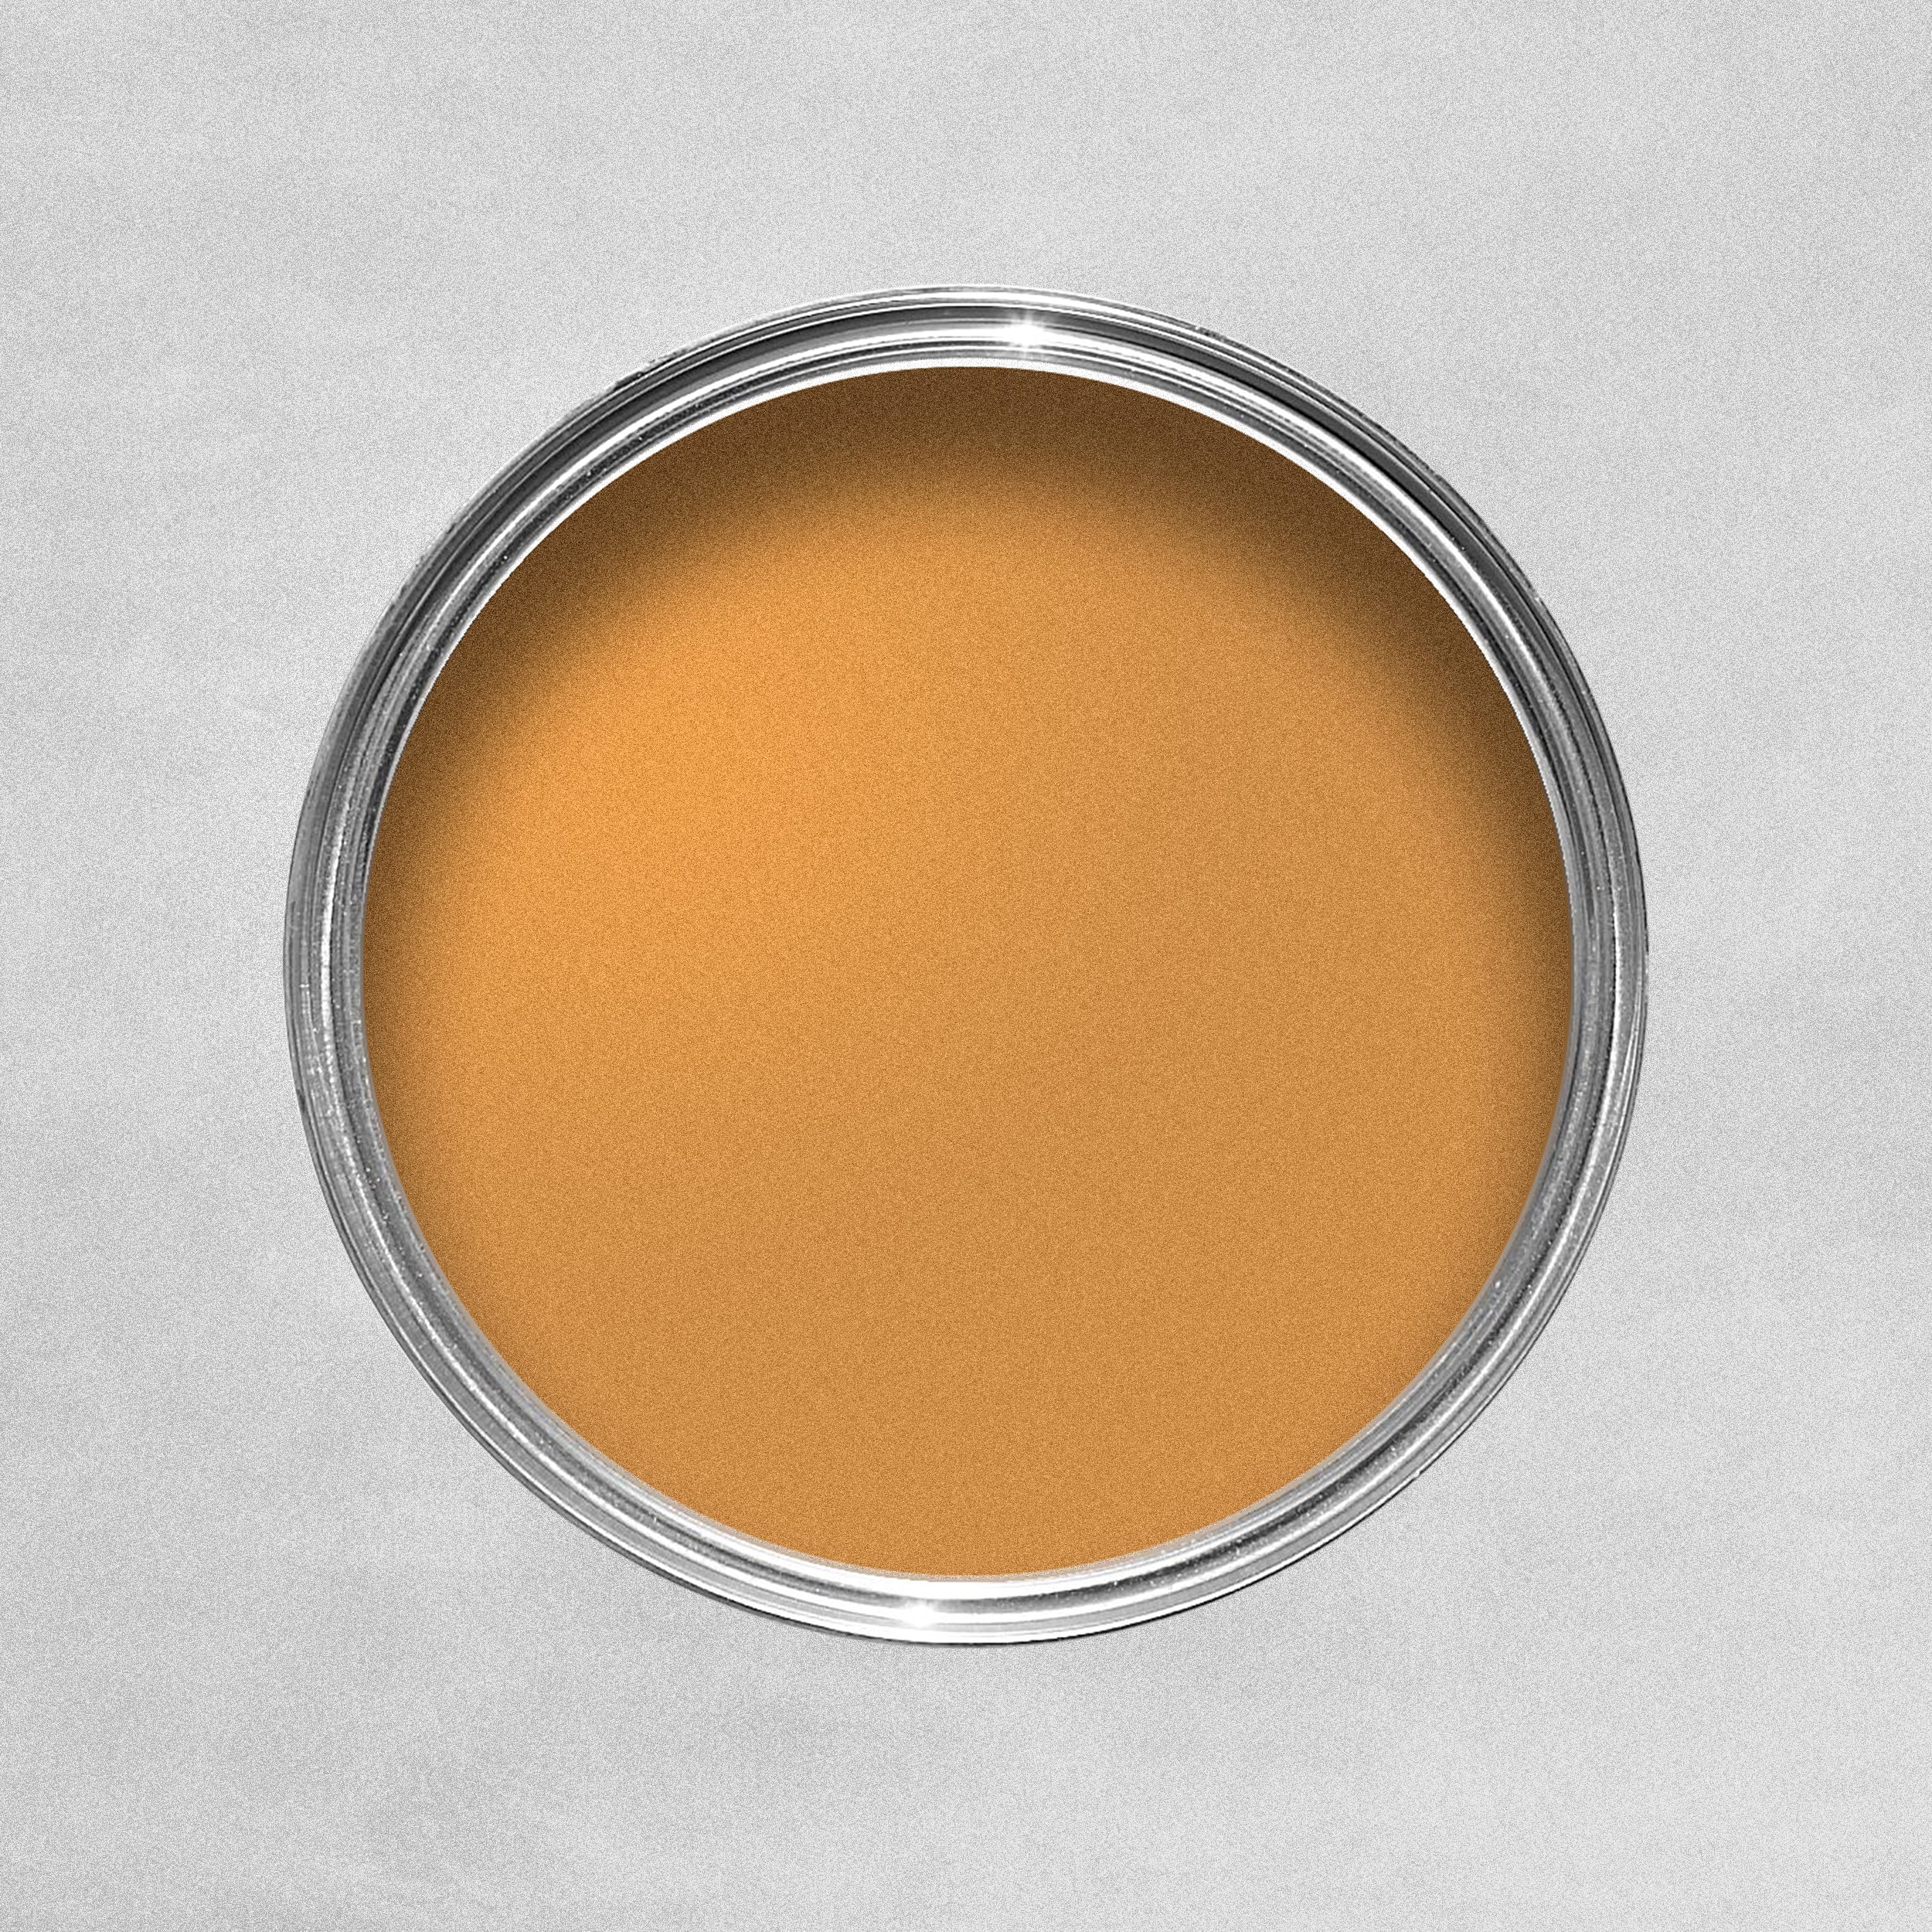 Dulux Made By Me Hobby & Craft Paint 125ml - Metallic Gorgeous Gold